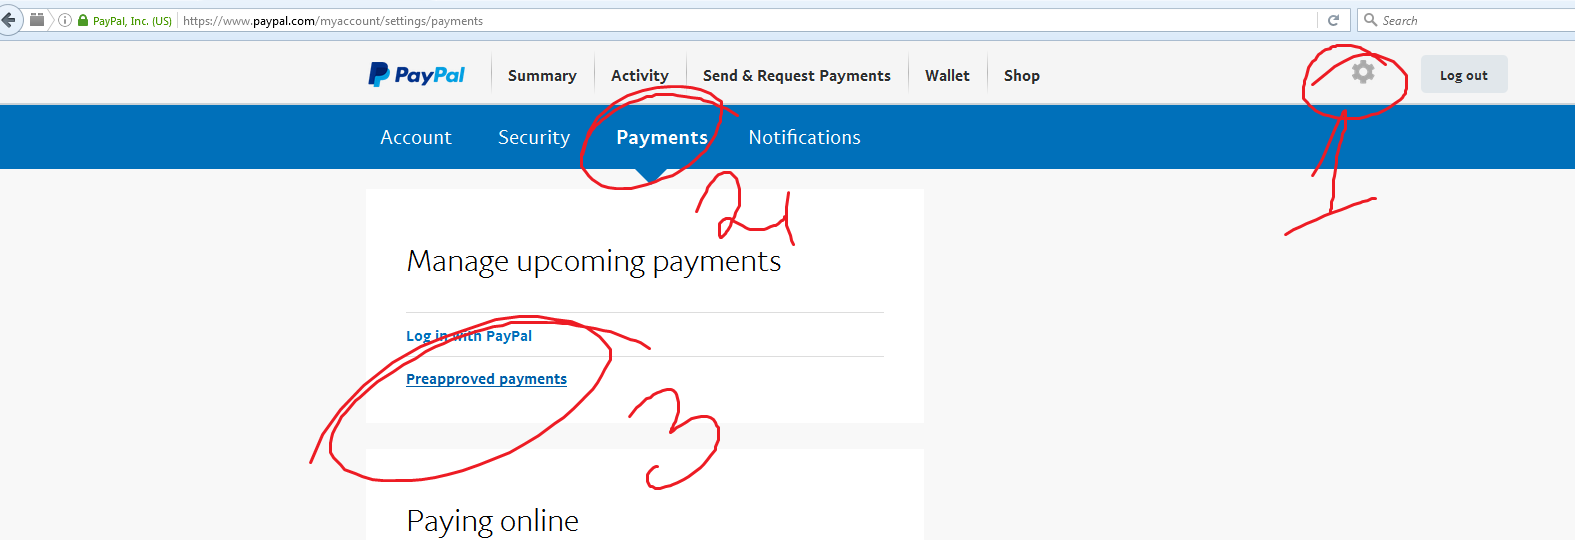 How do I convert my money to another currency in PayPal? | PayPal GB